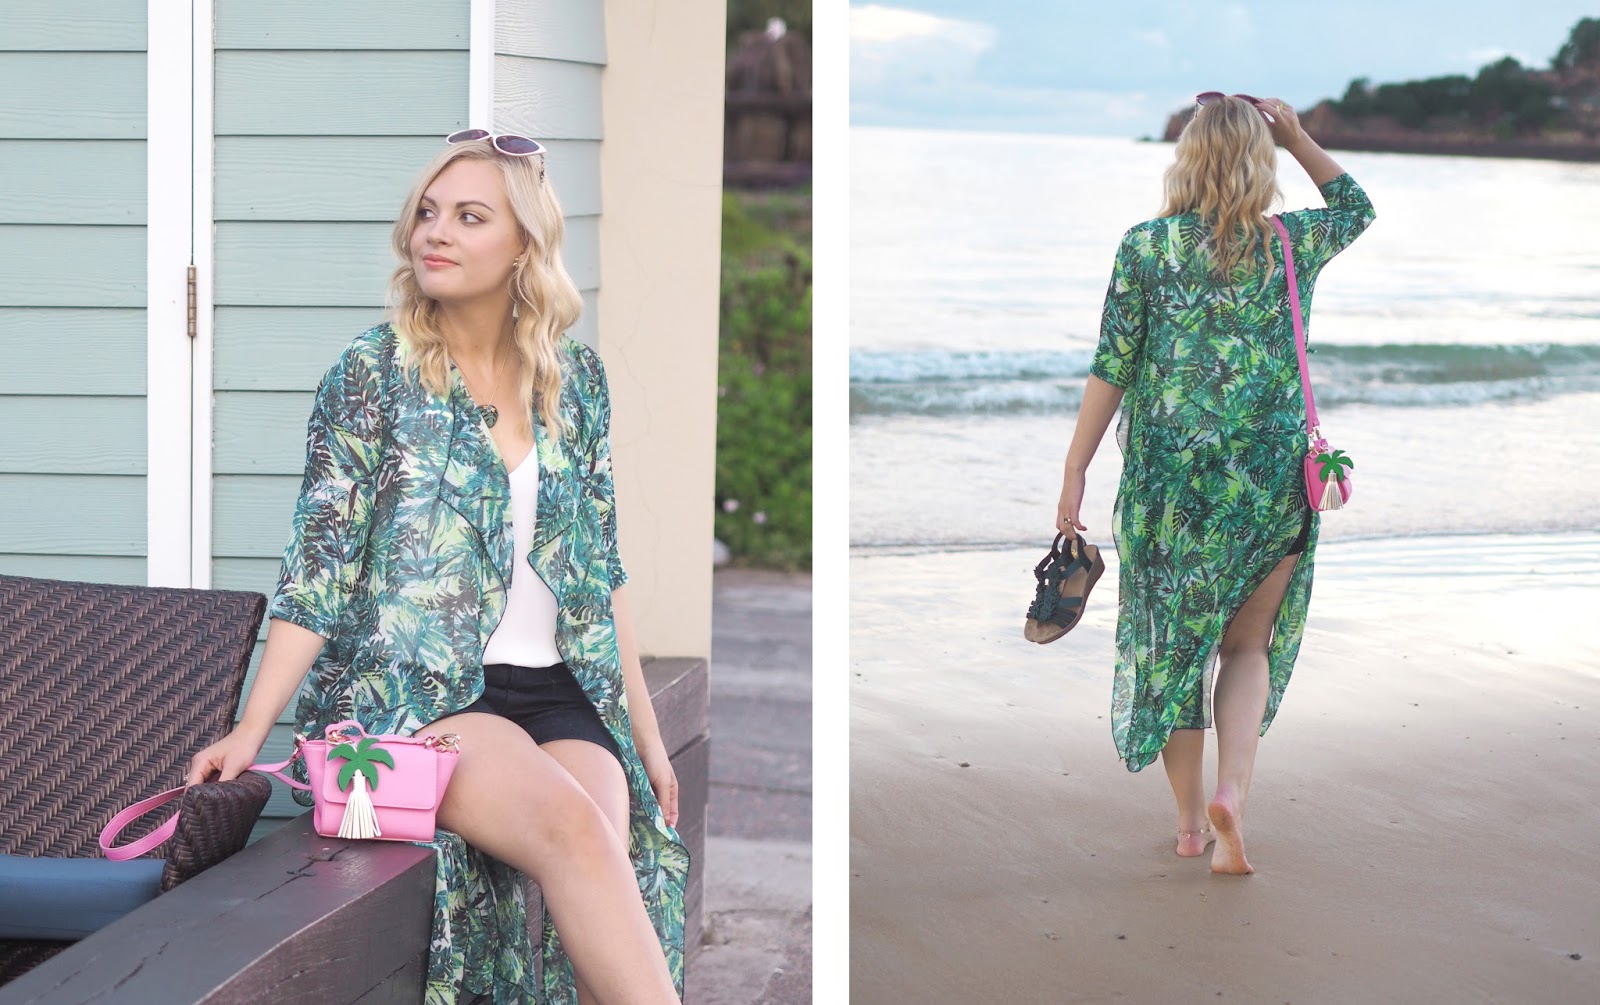 Palm Prints & The Most Perfect Beach, Katie Kirk Loves, UK Blogger, UK Fashion Blogger, Style Blogger, Style Influencer, Boohoo Style, St Brelades Bay, Jersey, Travel Blogger, Channel Islands, Outfit Post, Outfit Of The Day, Skinnydip London, Palm Print Fashion, And Mary Jewellery